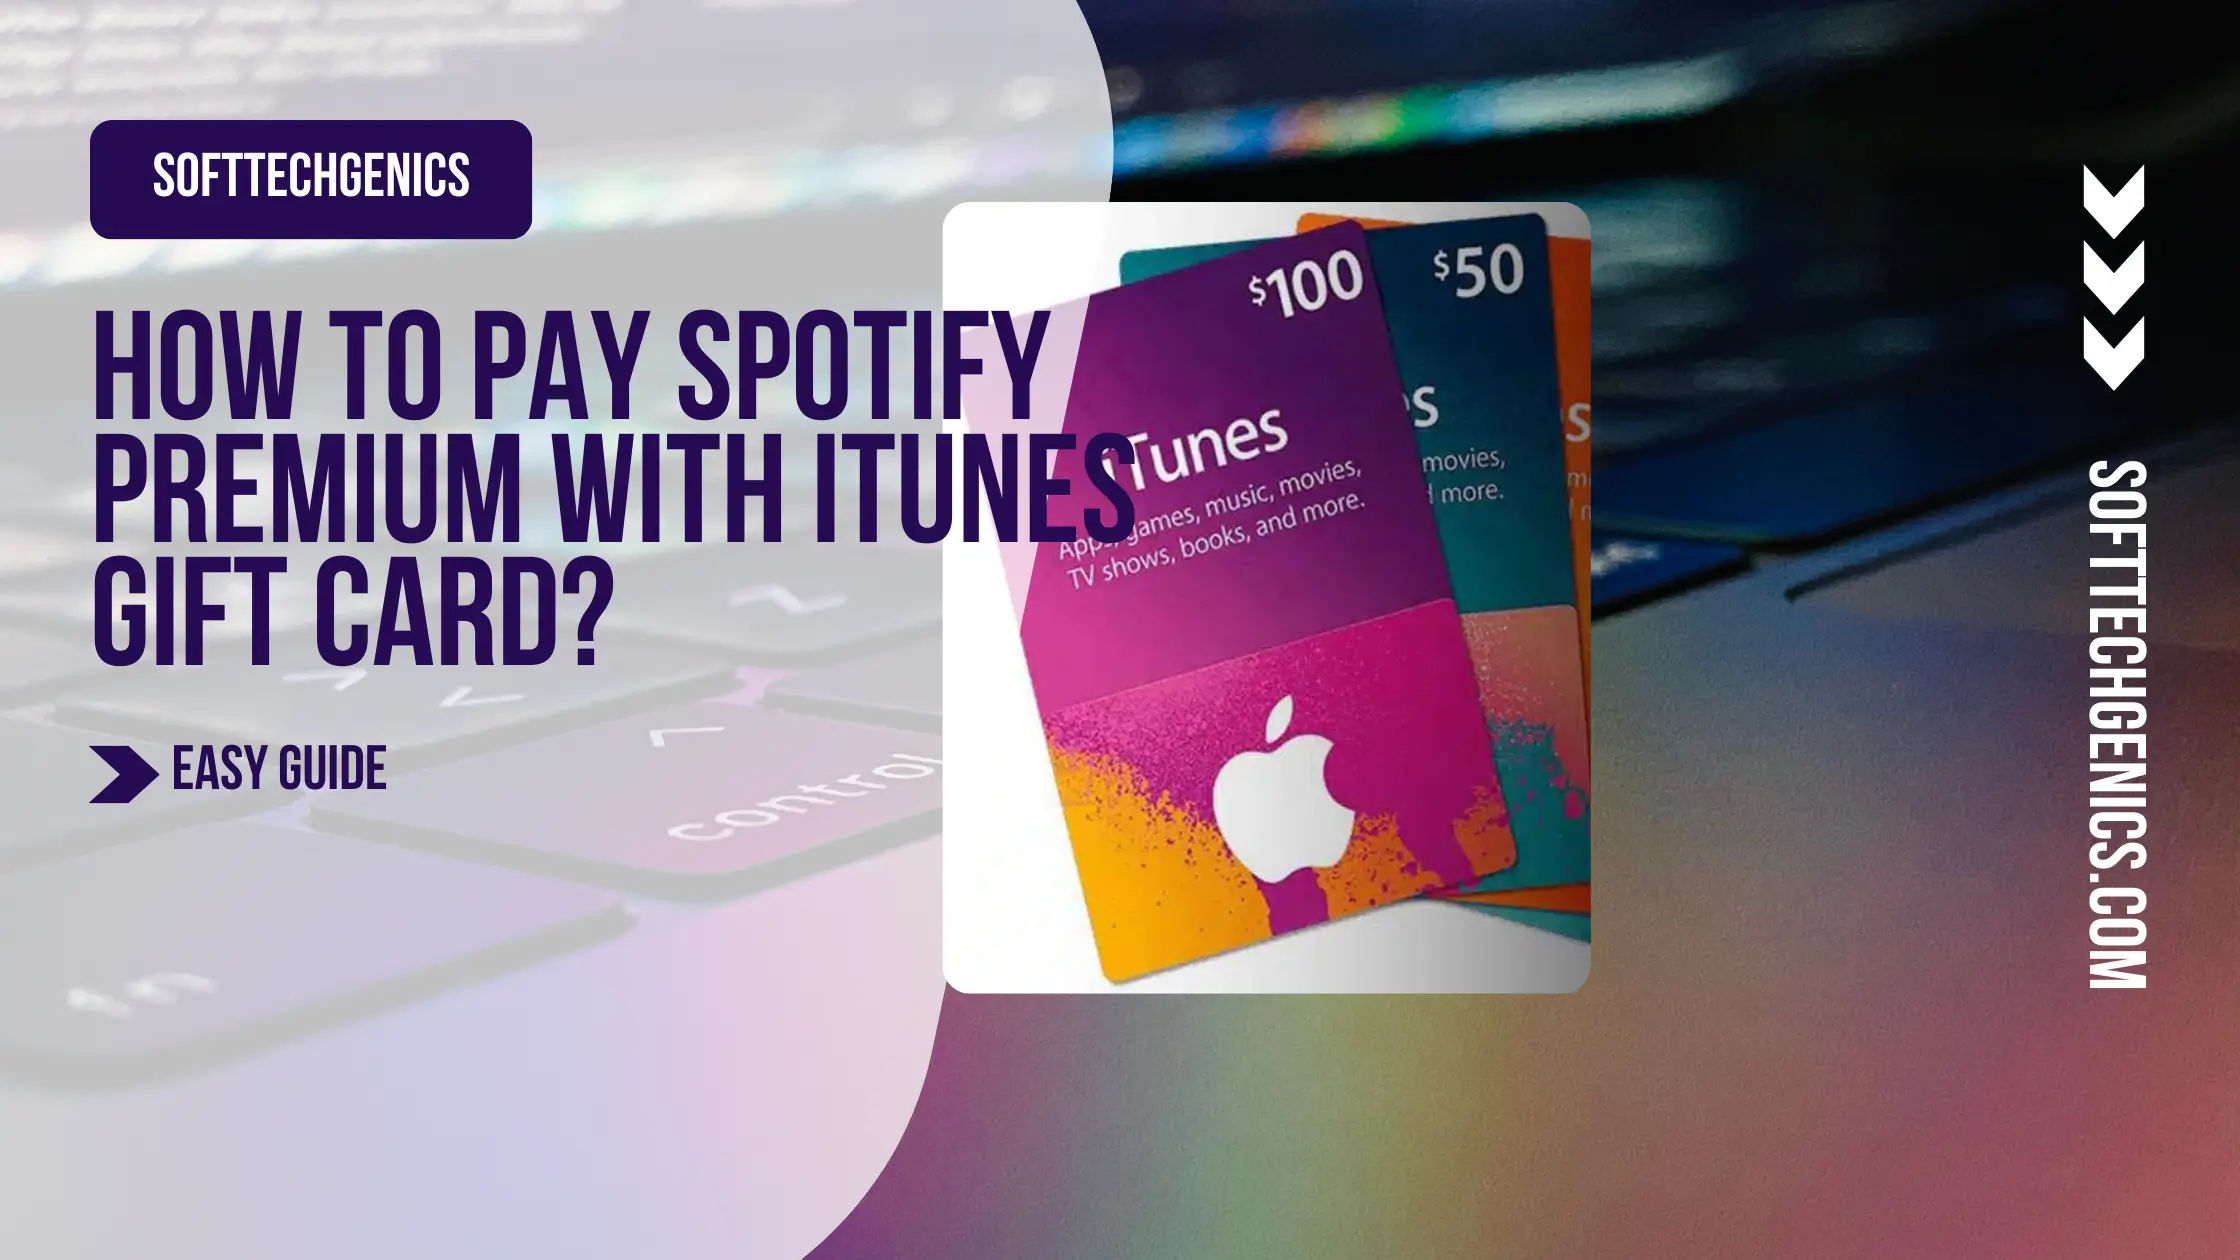 How To Pay Spotify Premium With iTunes Gift Card?